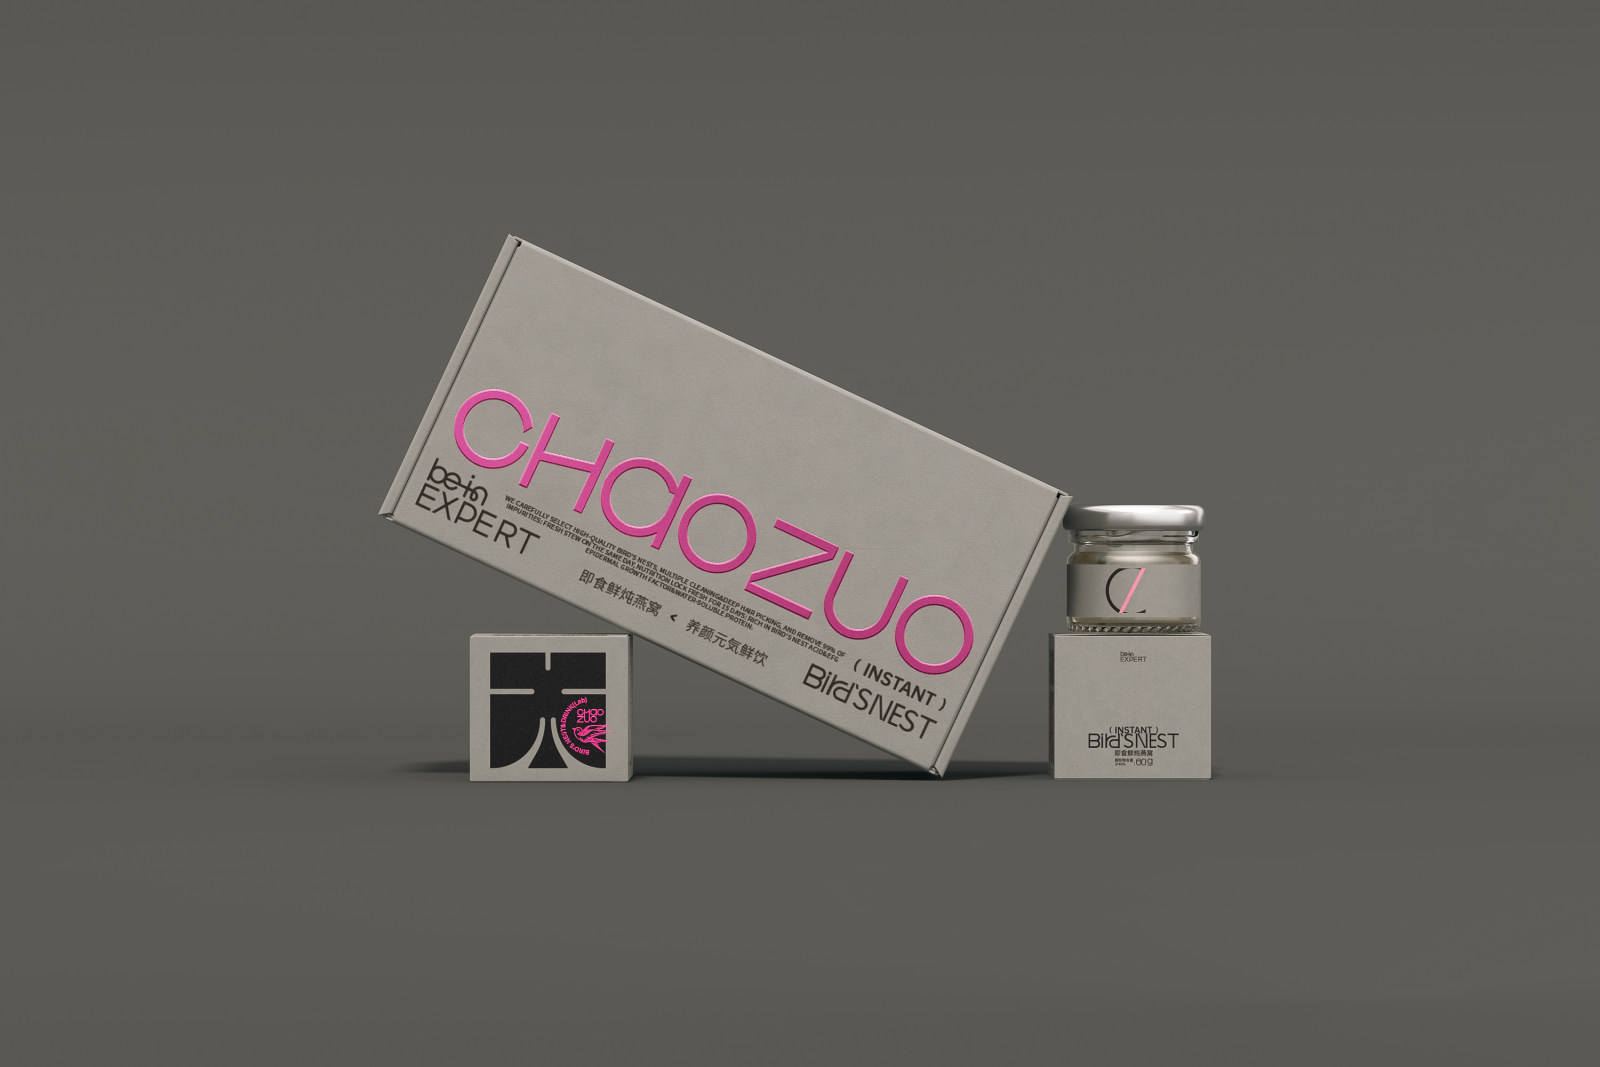 CHAOZUO+BRAND%REDESIGN